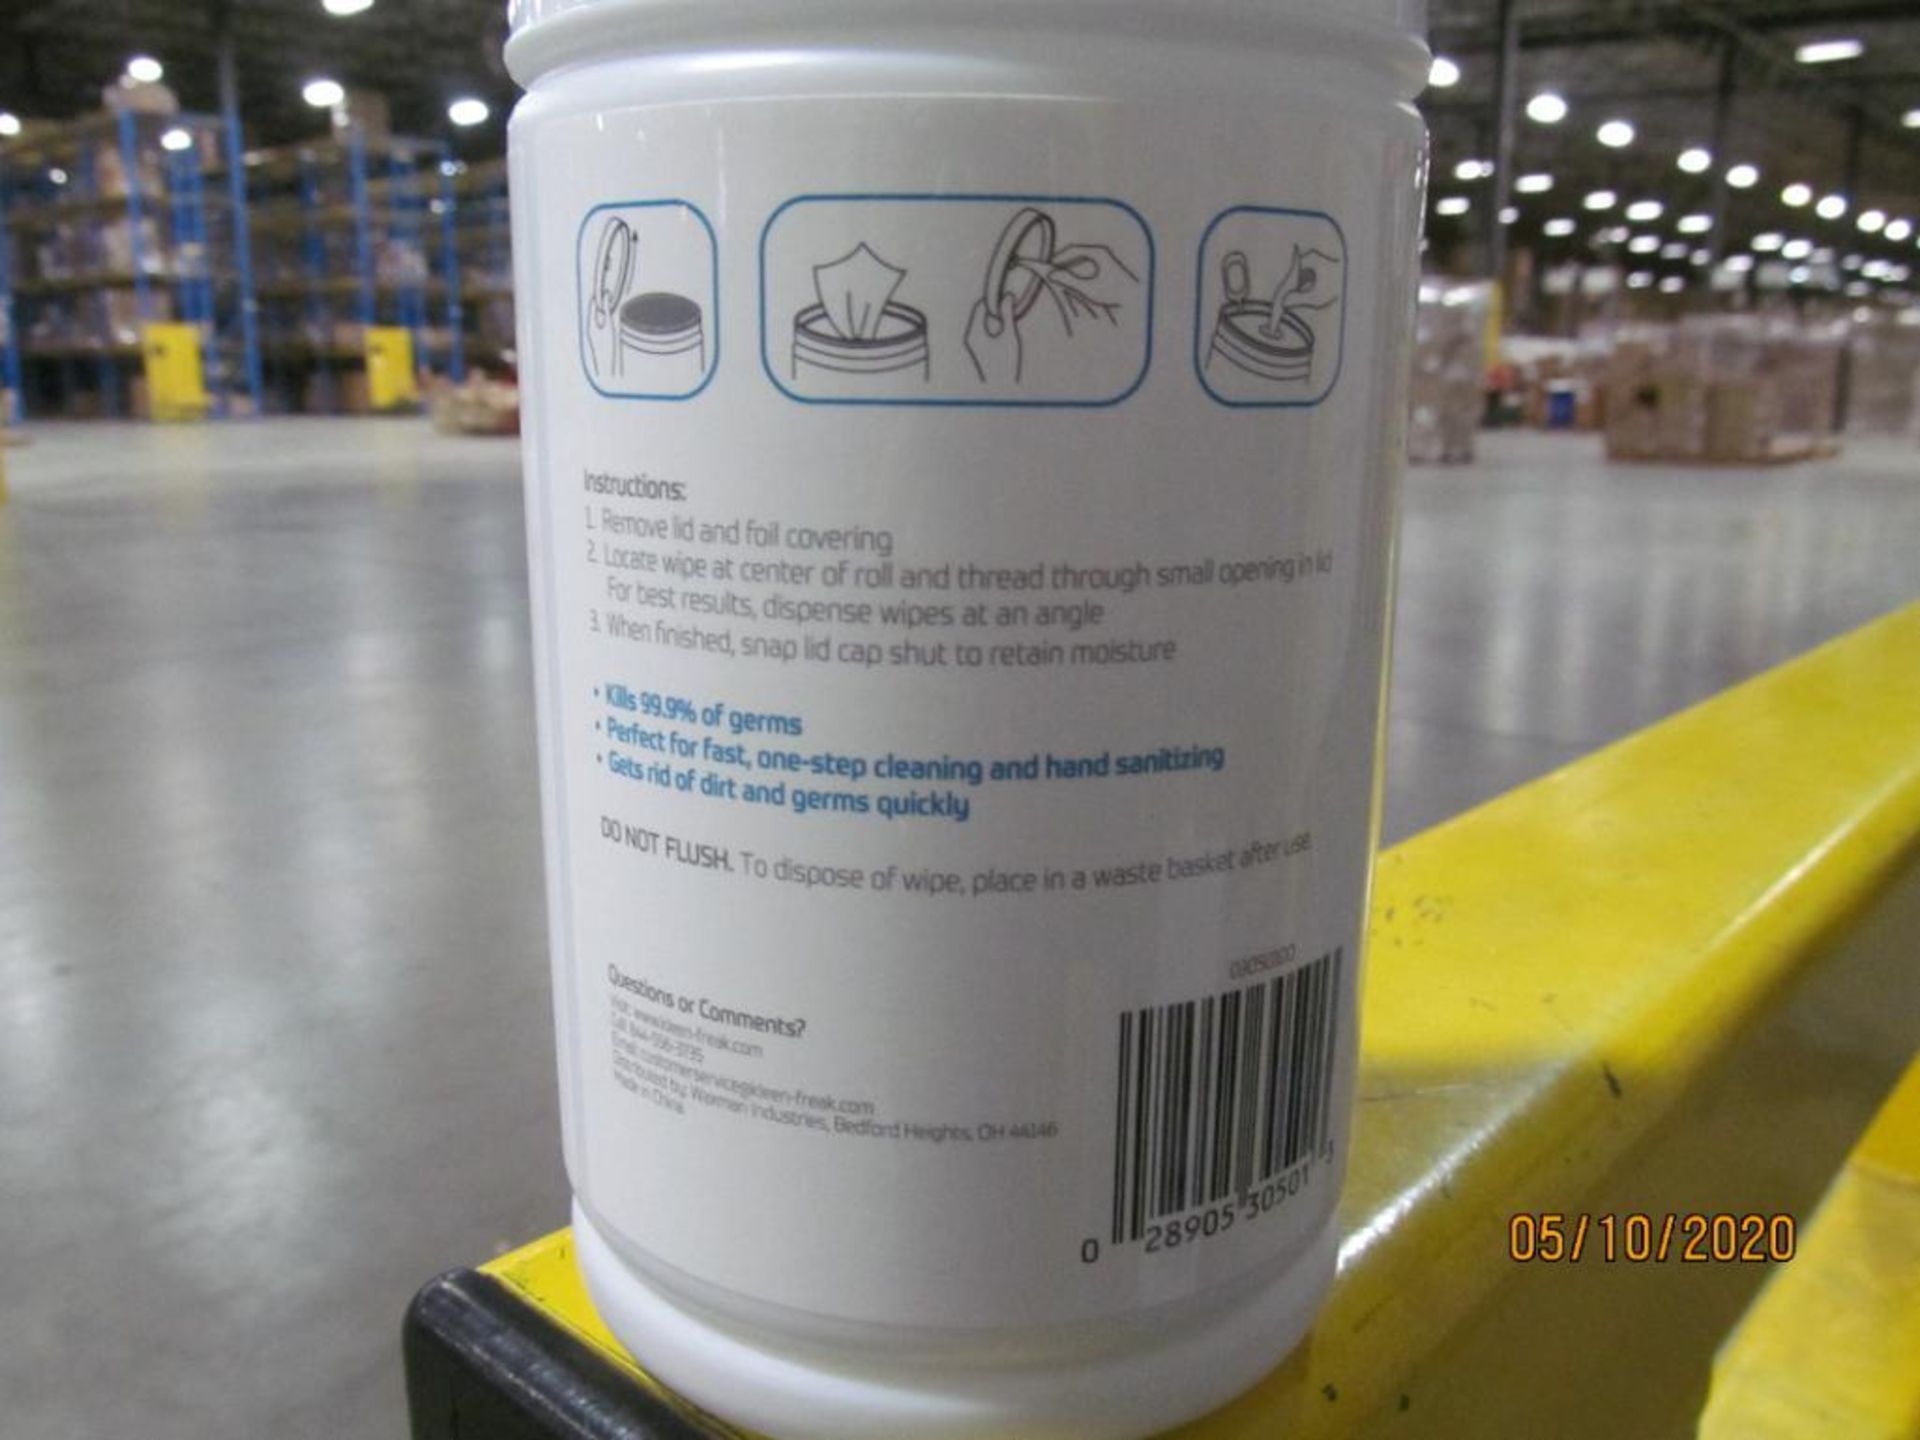 Lot of Waxman Kleen Freak Sanitizing Wipes consisting of 6,480 packages on 10 pallets. Each package - Image 2 of 11